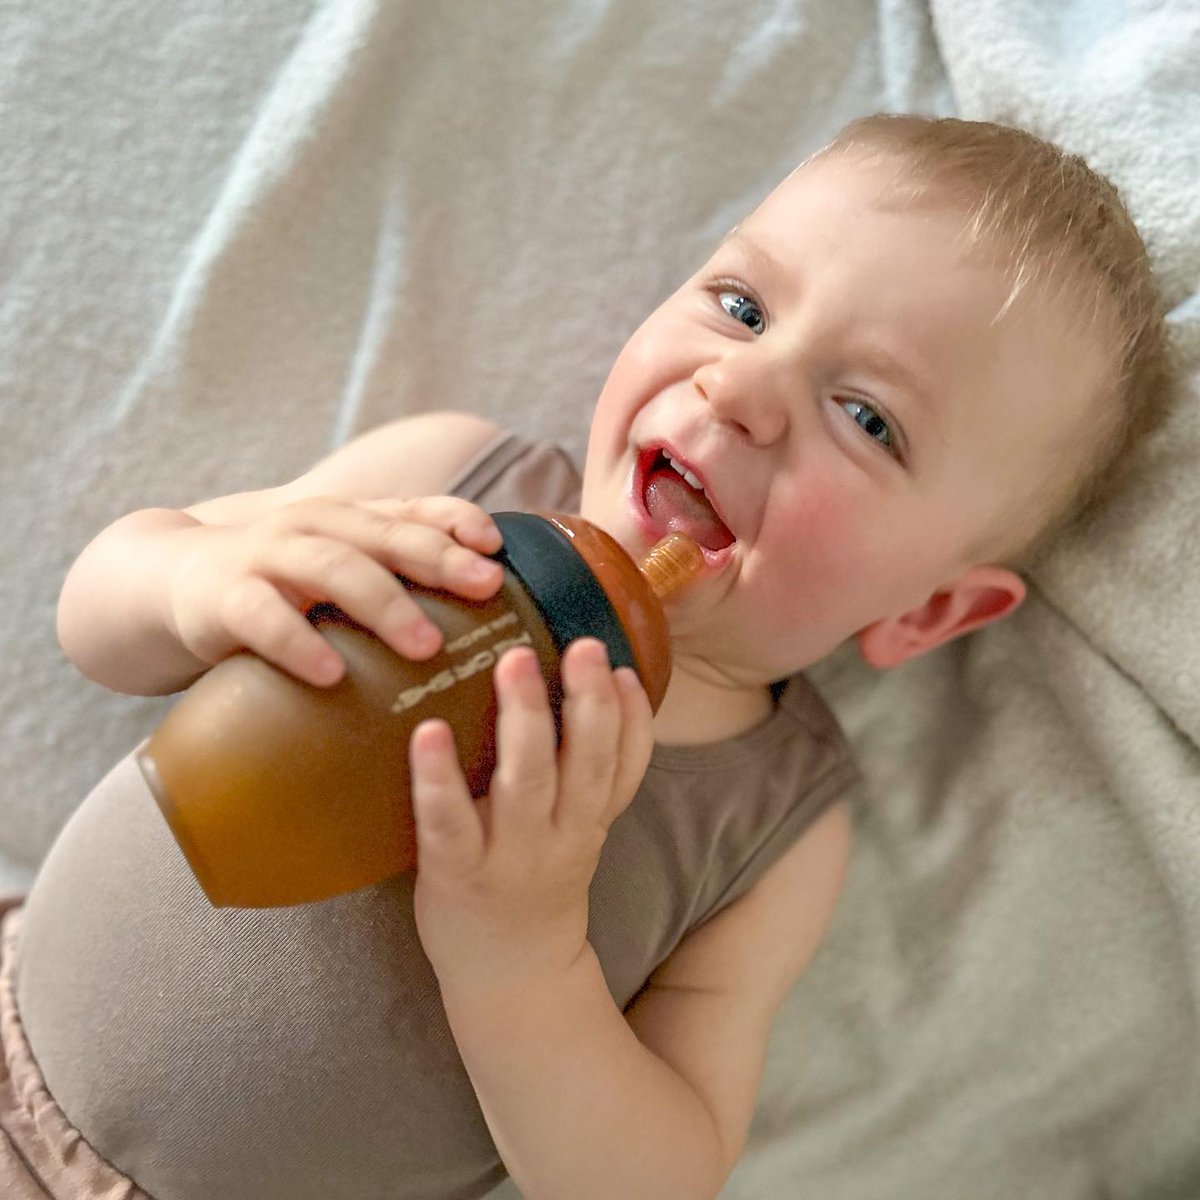 Every coo and gurgle melts in our heart ❤️
.
heorshe.com
he or she #heorshe #babybottle #goodlooking #specialdesign #babymusthaves #heorshebabybottle #heorshesippycup #honestlymothering #mommyanddaughter #mommyandson #lifeisbeautiful #thatsdarling #thehappynow